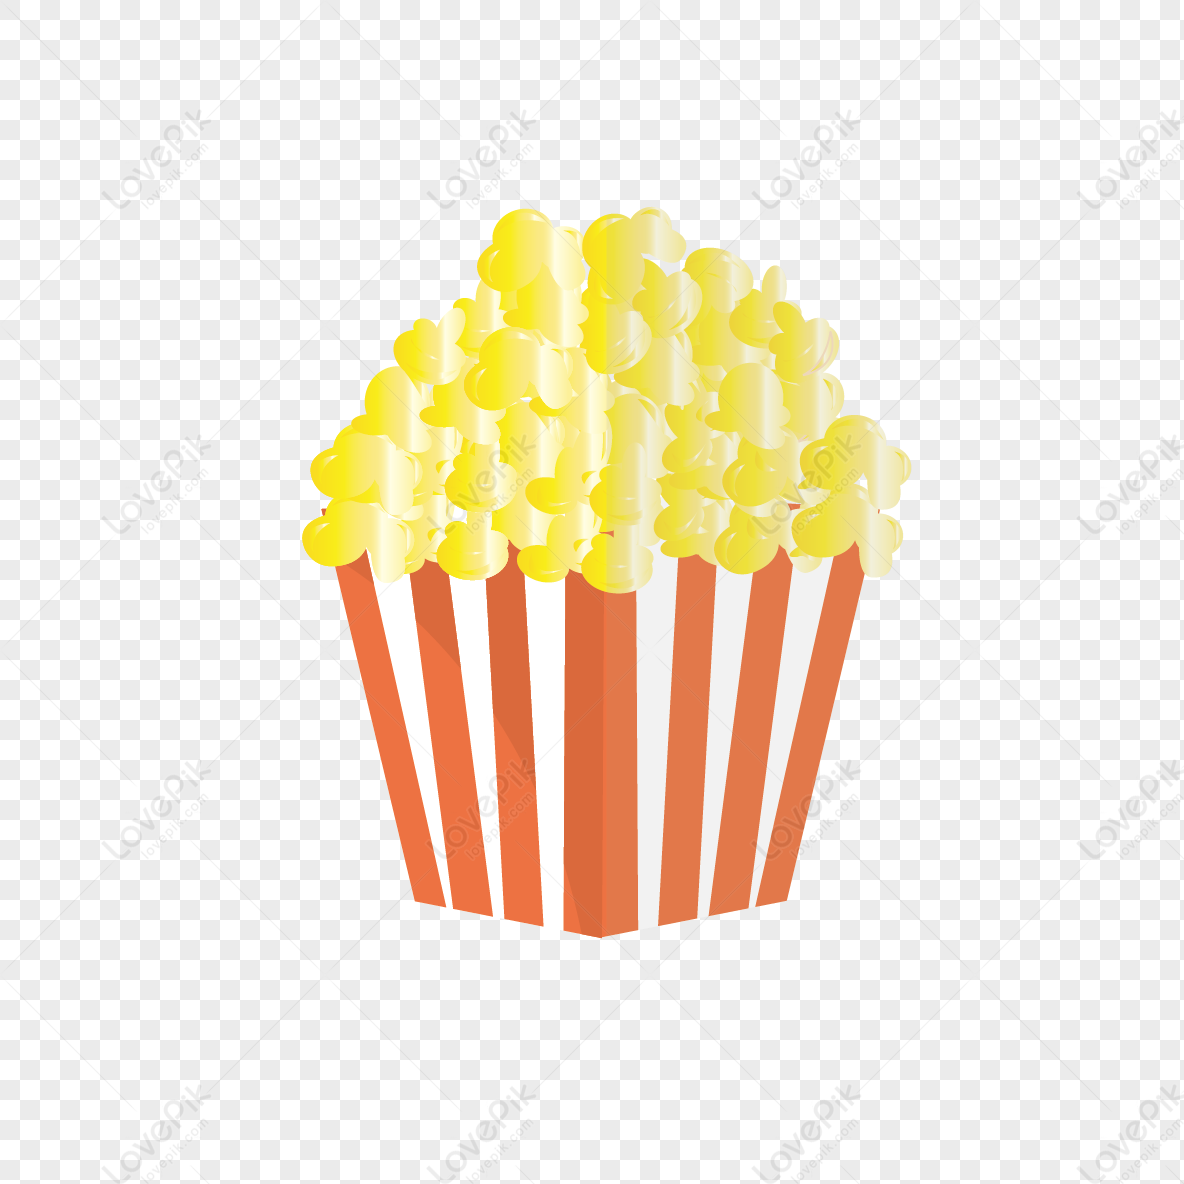 Ai Vector Cute Cartoon Stereo Movie Element Food Snack Popcorn PNG  Transparent Background And Clipart Image For Free Download - Lovepik |  401324930